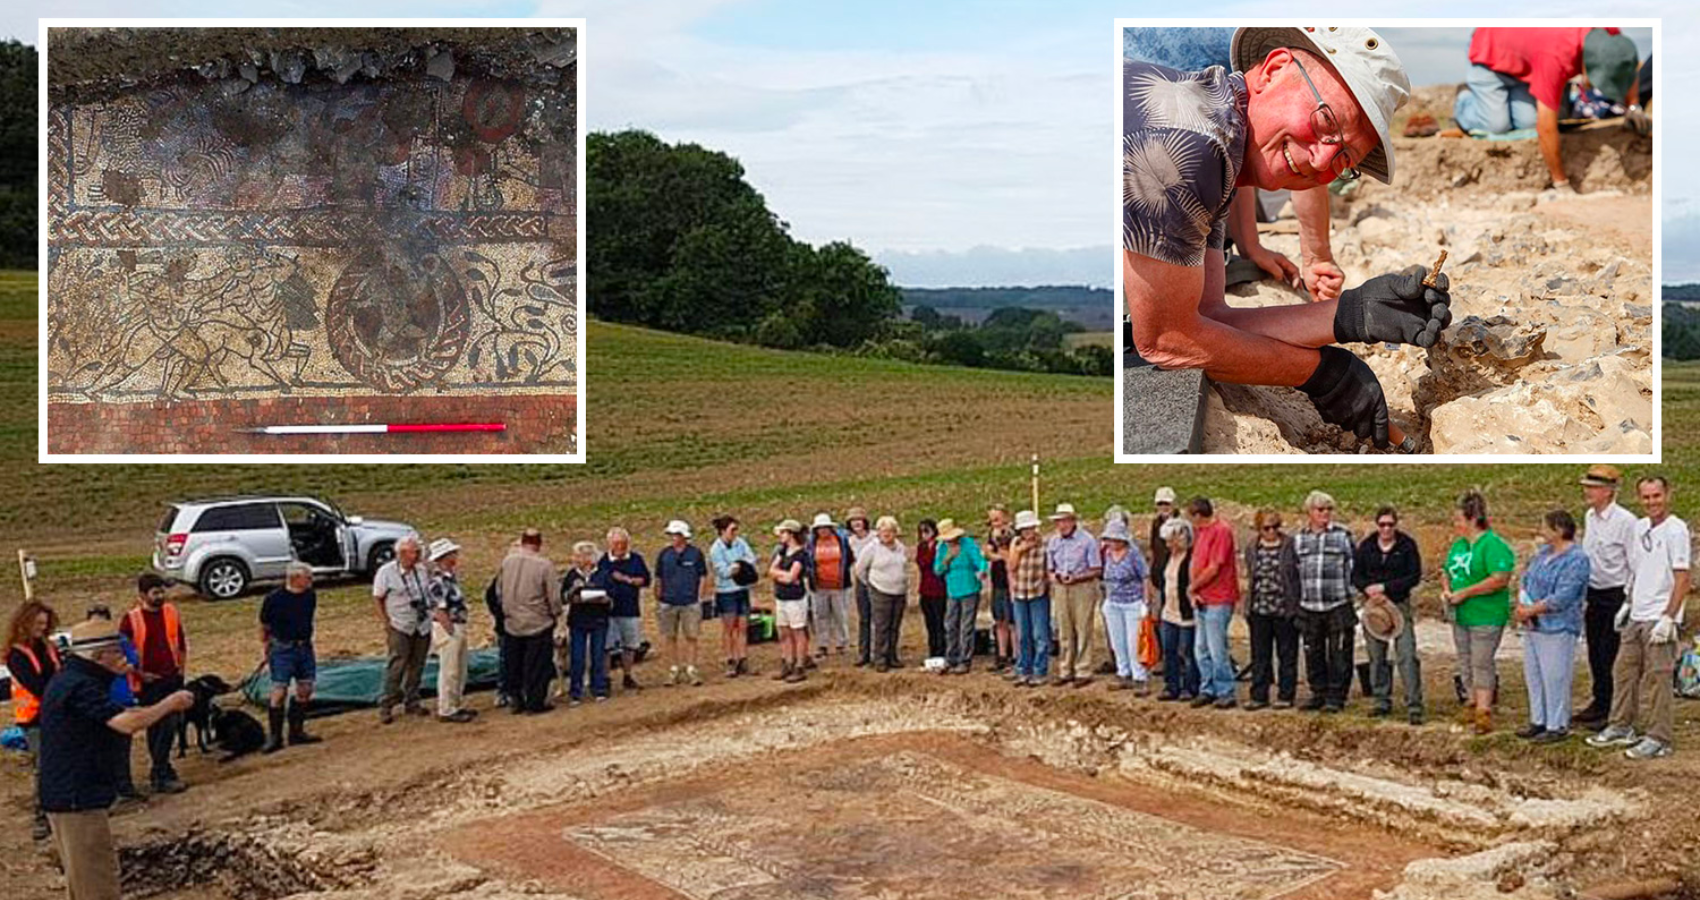 Amateur archaeologists unearth 1,600-year-old Roman mosaic